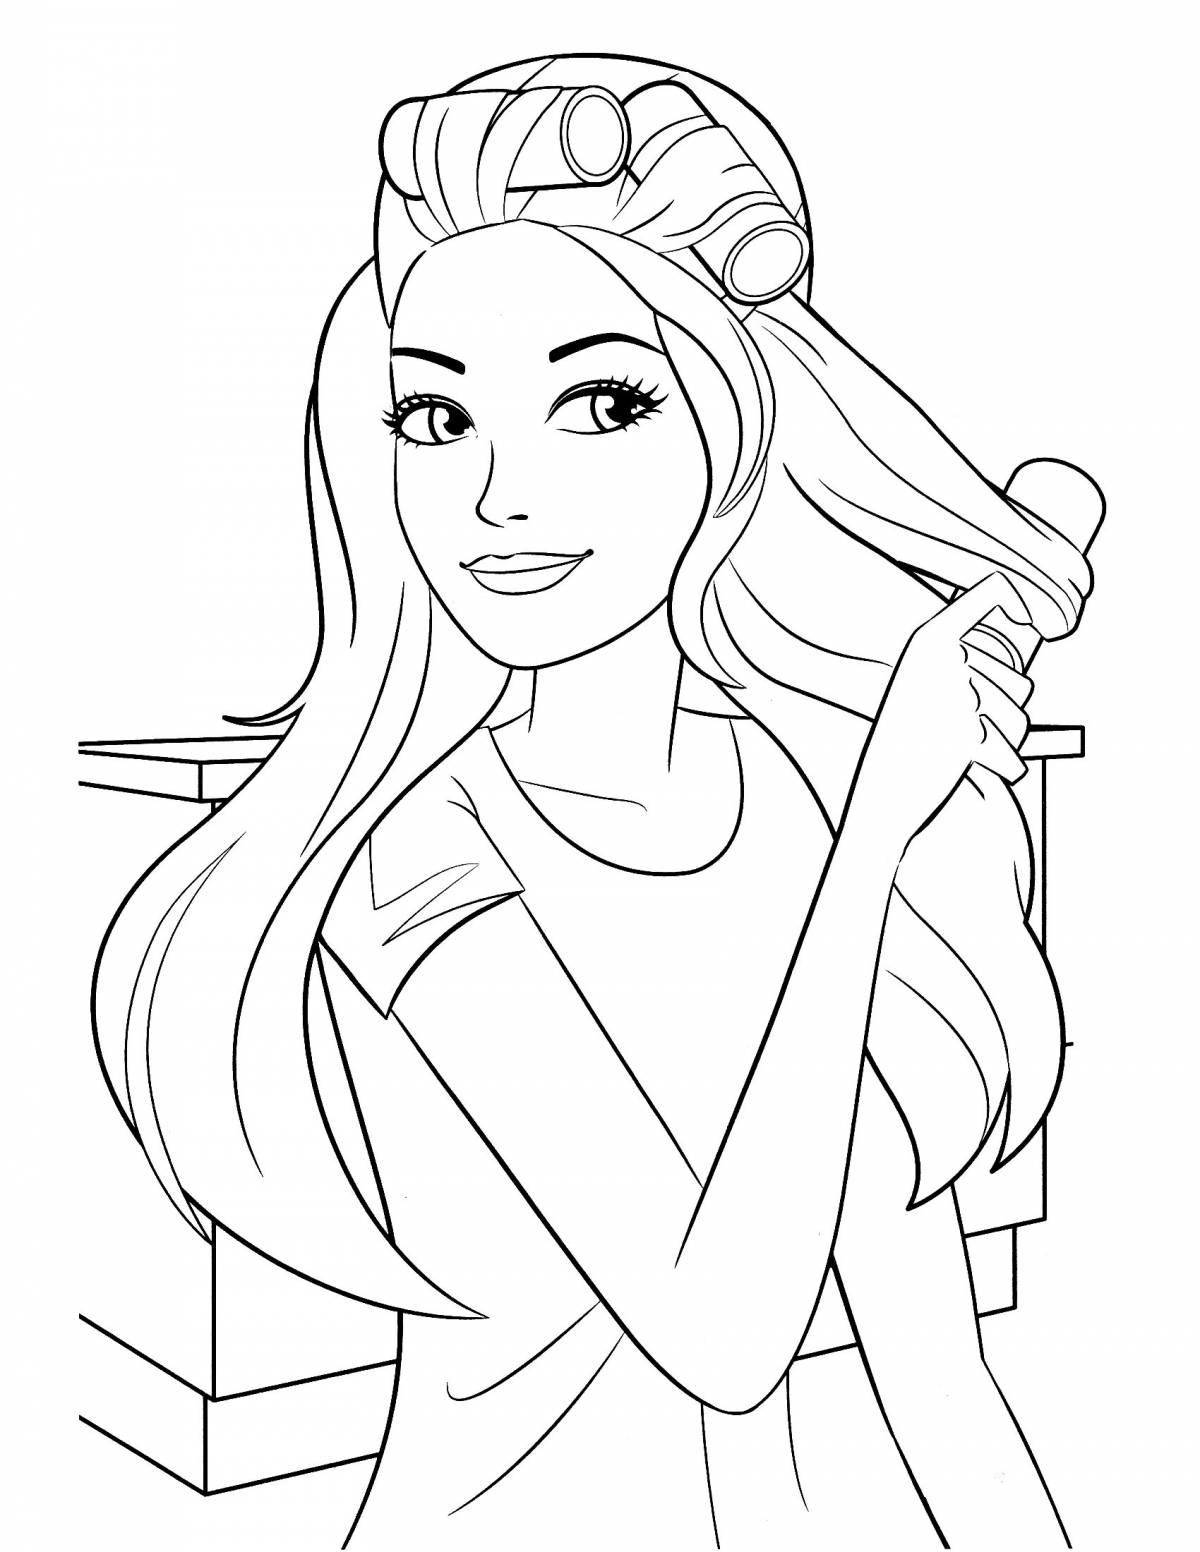 Exciting coloring book for drawing barbie